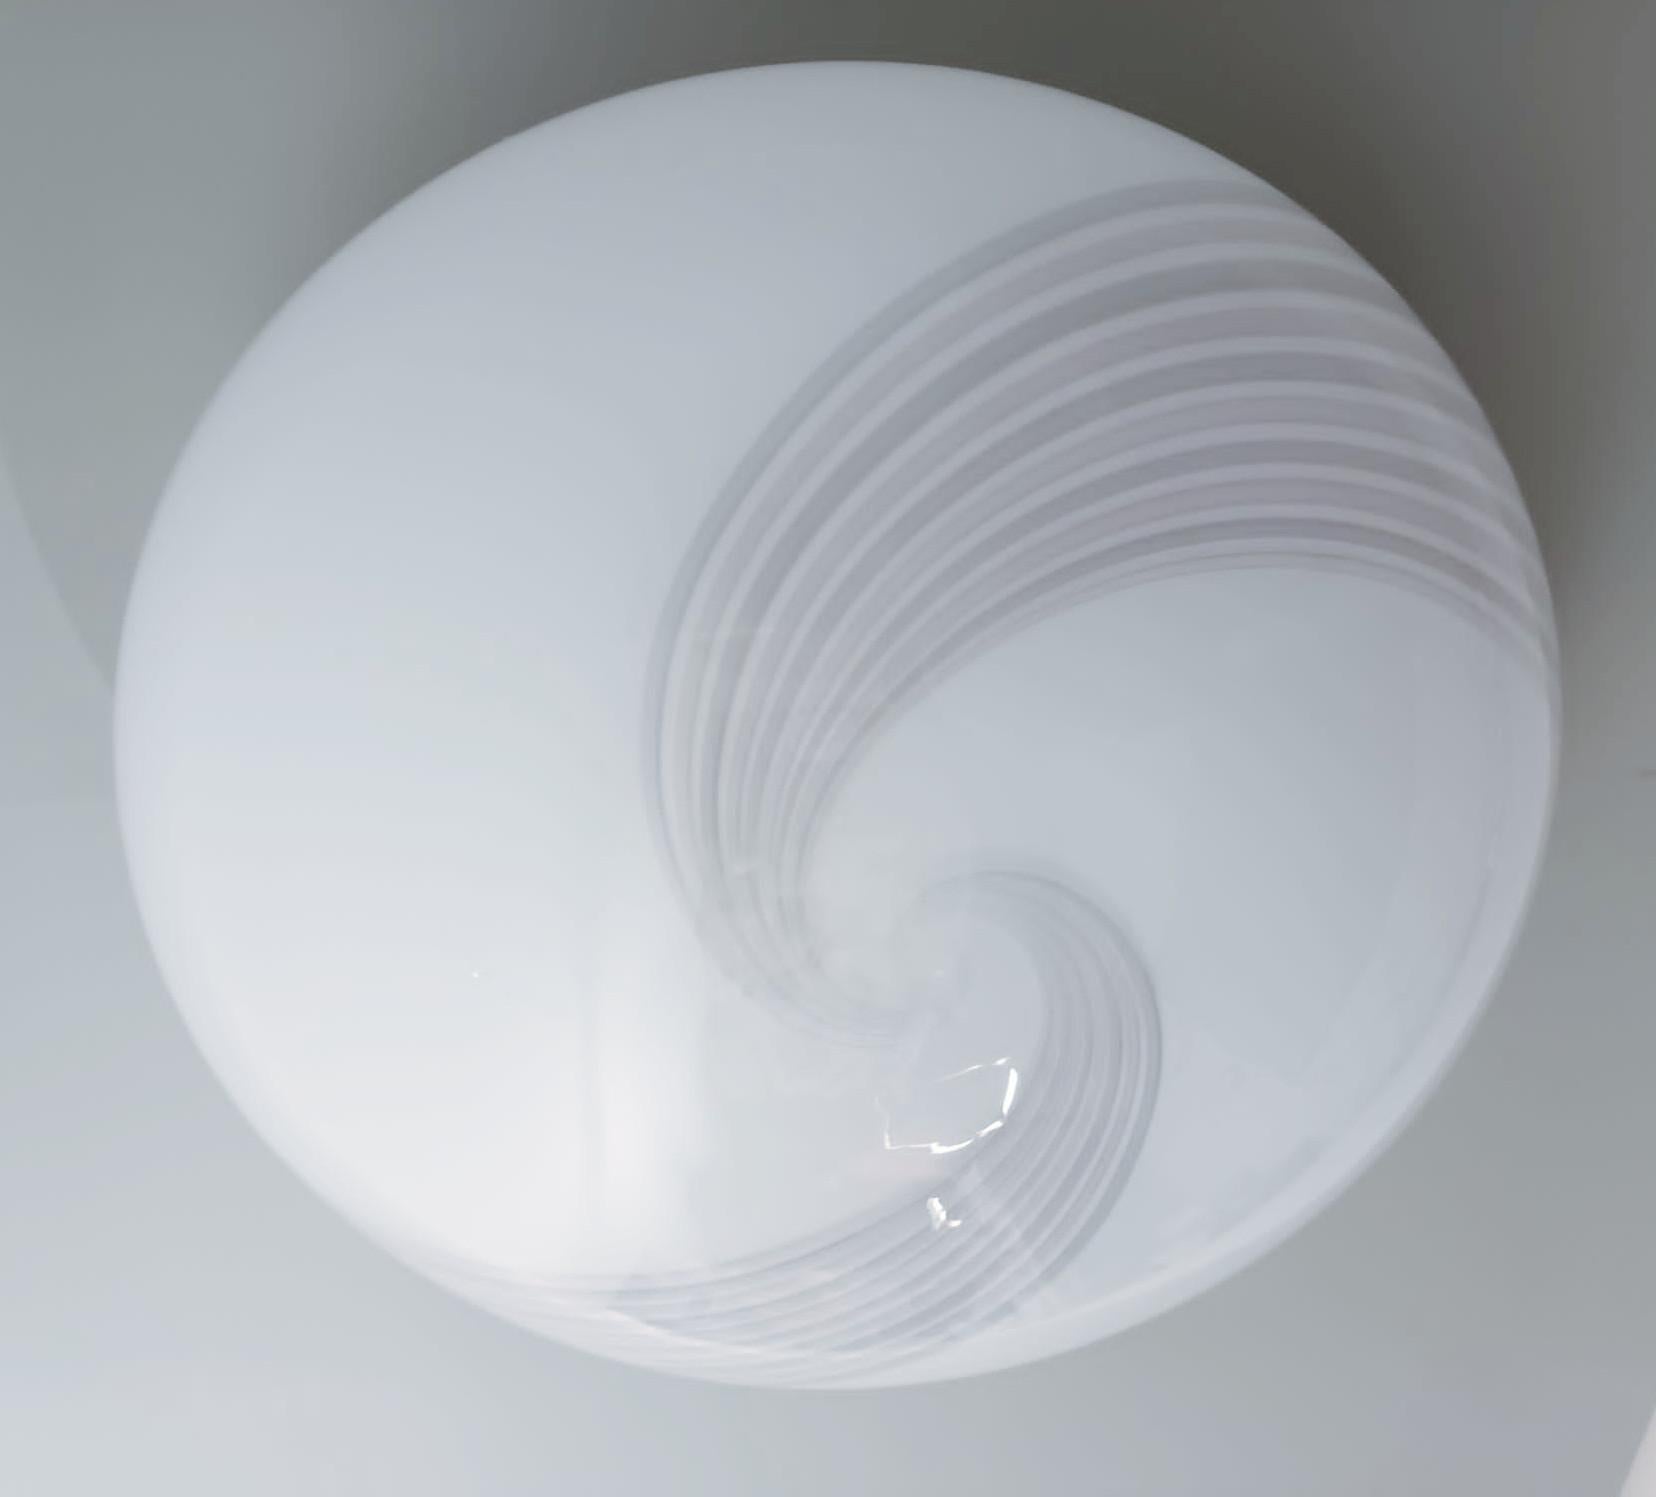 Vintage Italian flush mount or wall light with a single milky white Murano glass shade decorated with ribbed spirals / Made in Italy in the style of Venini, circa 1960s
Measures: diameter 18 inches, height 8 inches
3 lights / E26 or E27 type / max